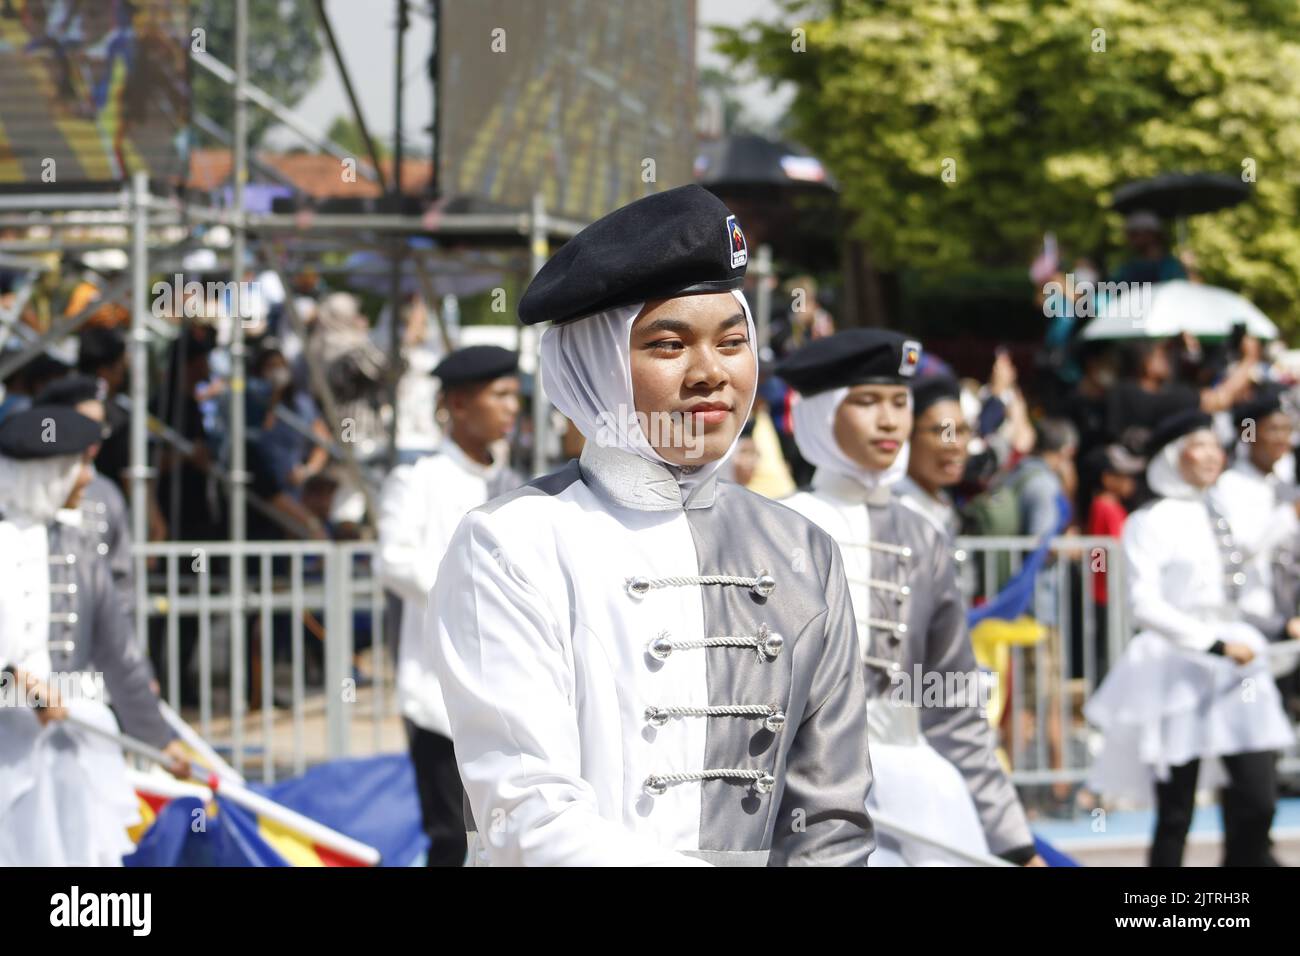 A member of the color guard performing during the 2022 Malaysia National Day celebrations Stock Photo